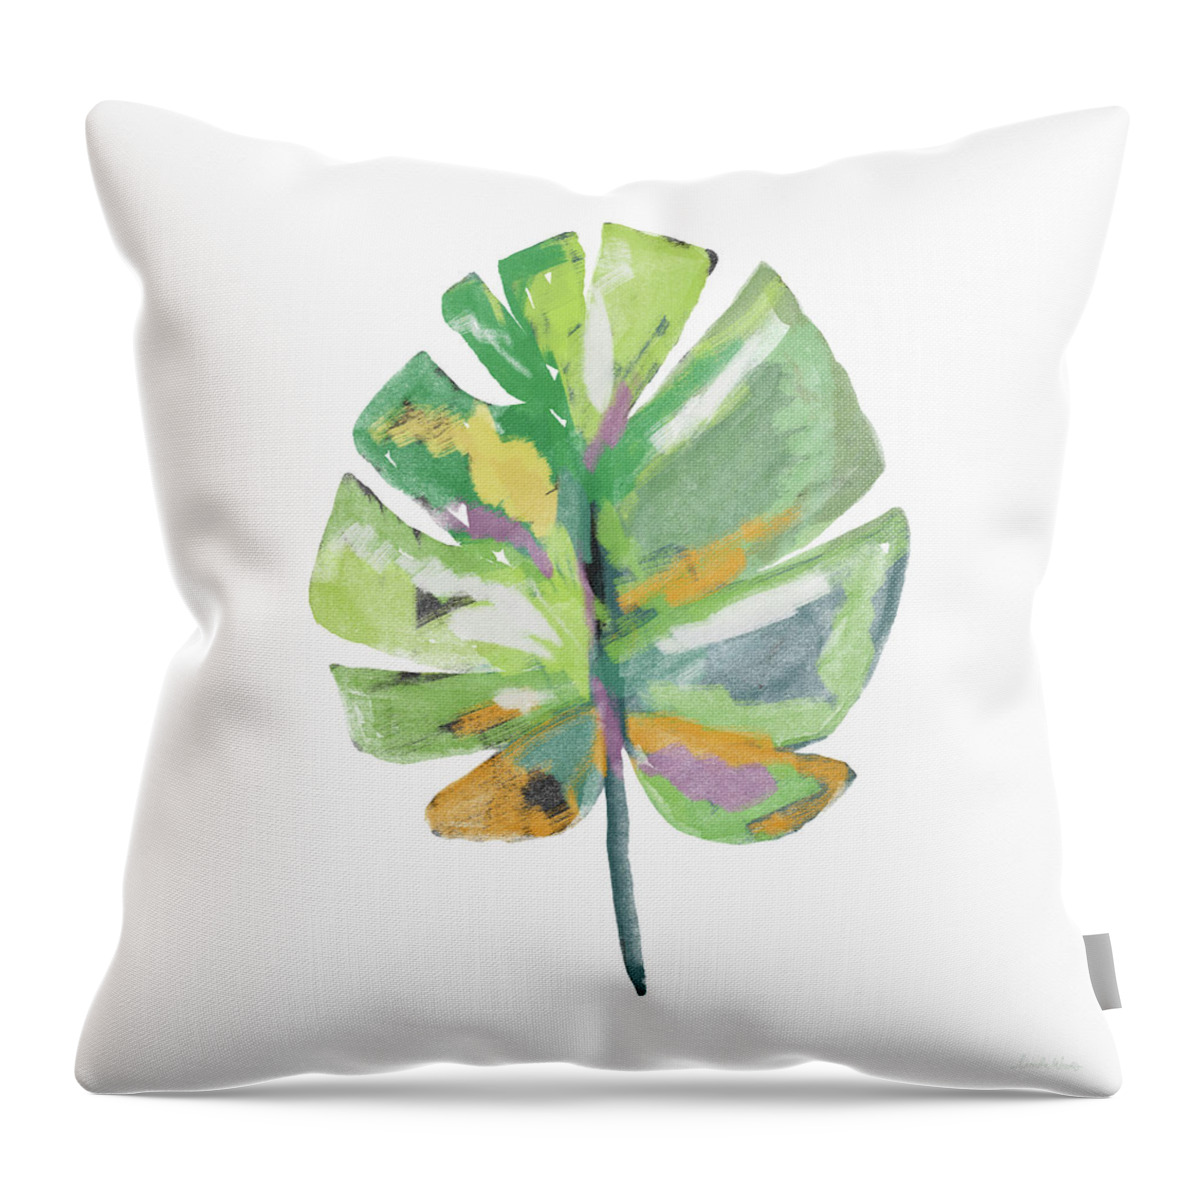 Leaf Throw Pillow featuring the mixed media Watercolor Palm Leaf- Art by Linda Woods by Linda Woods